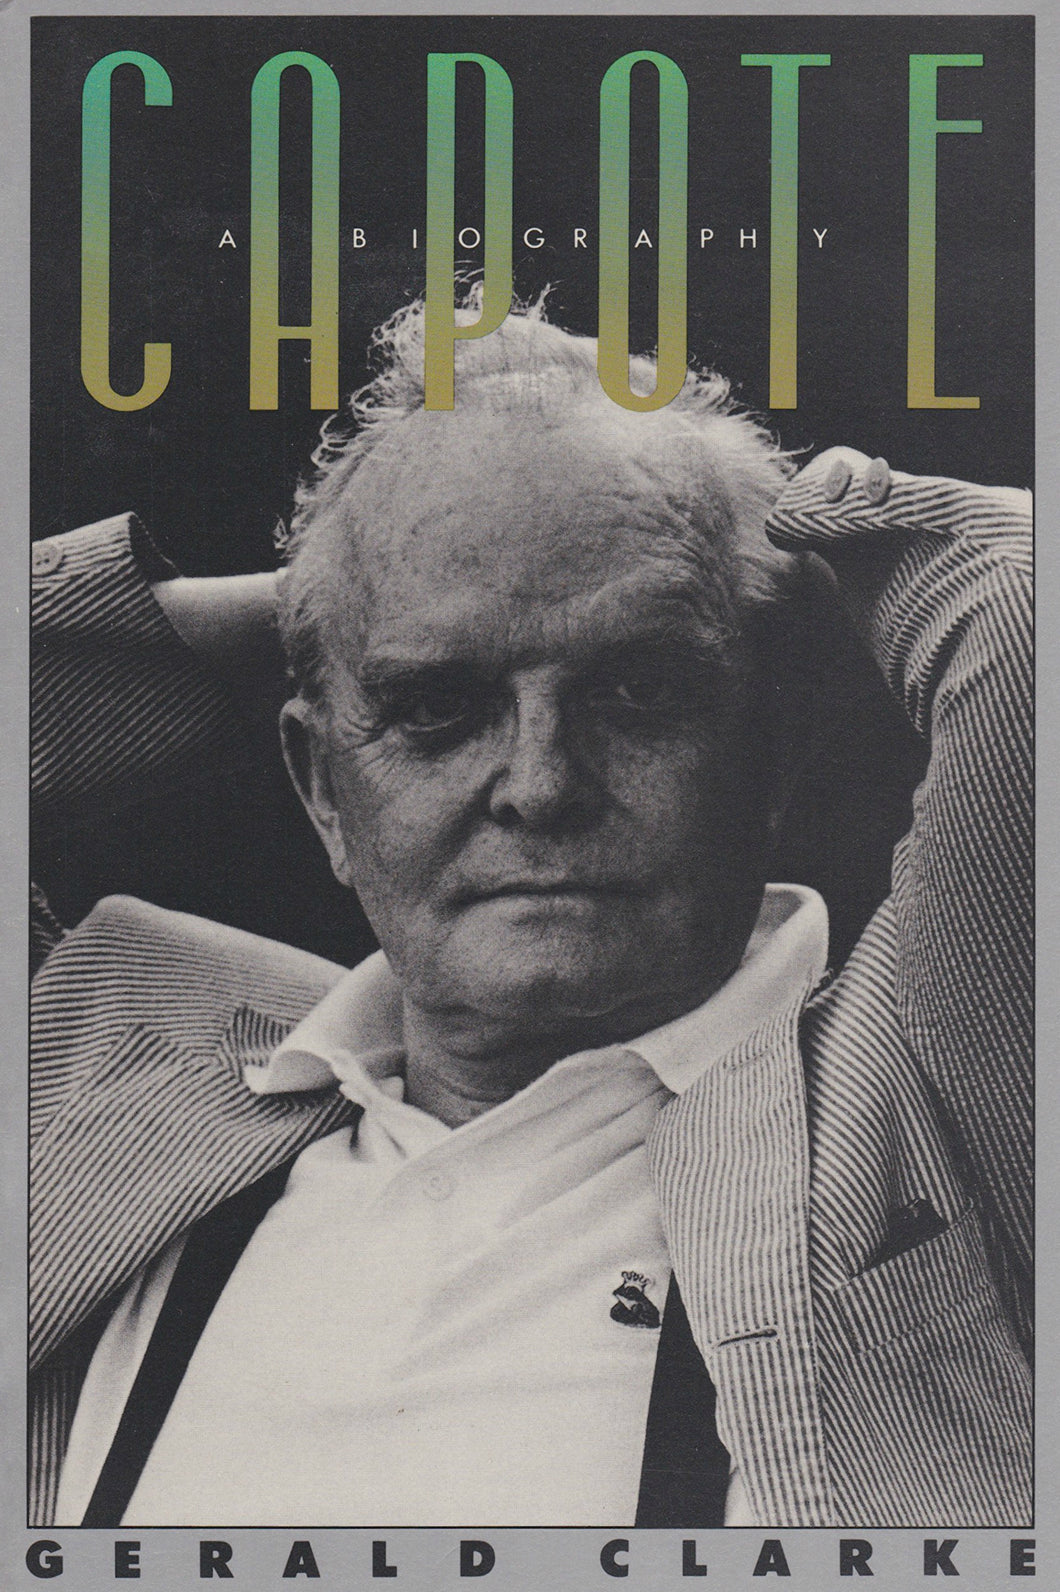 Capote: A Biography